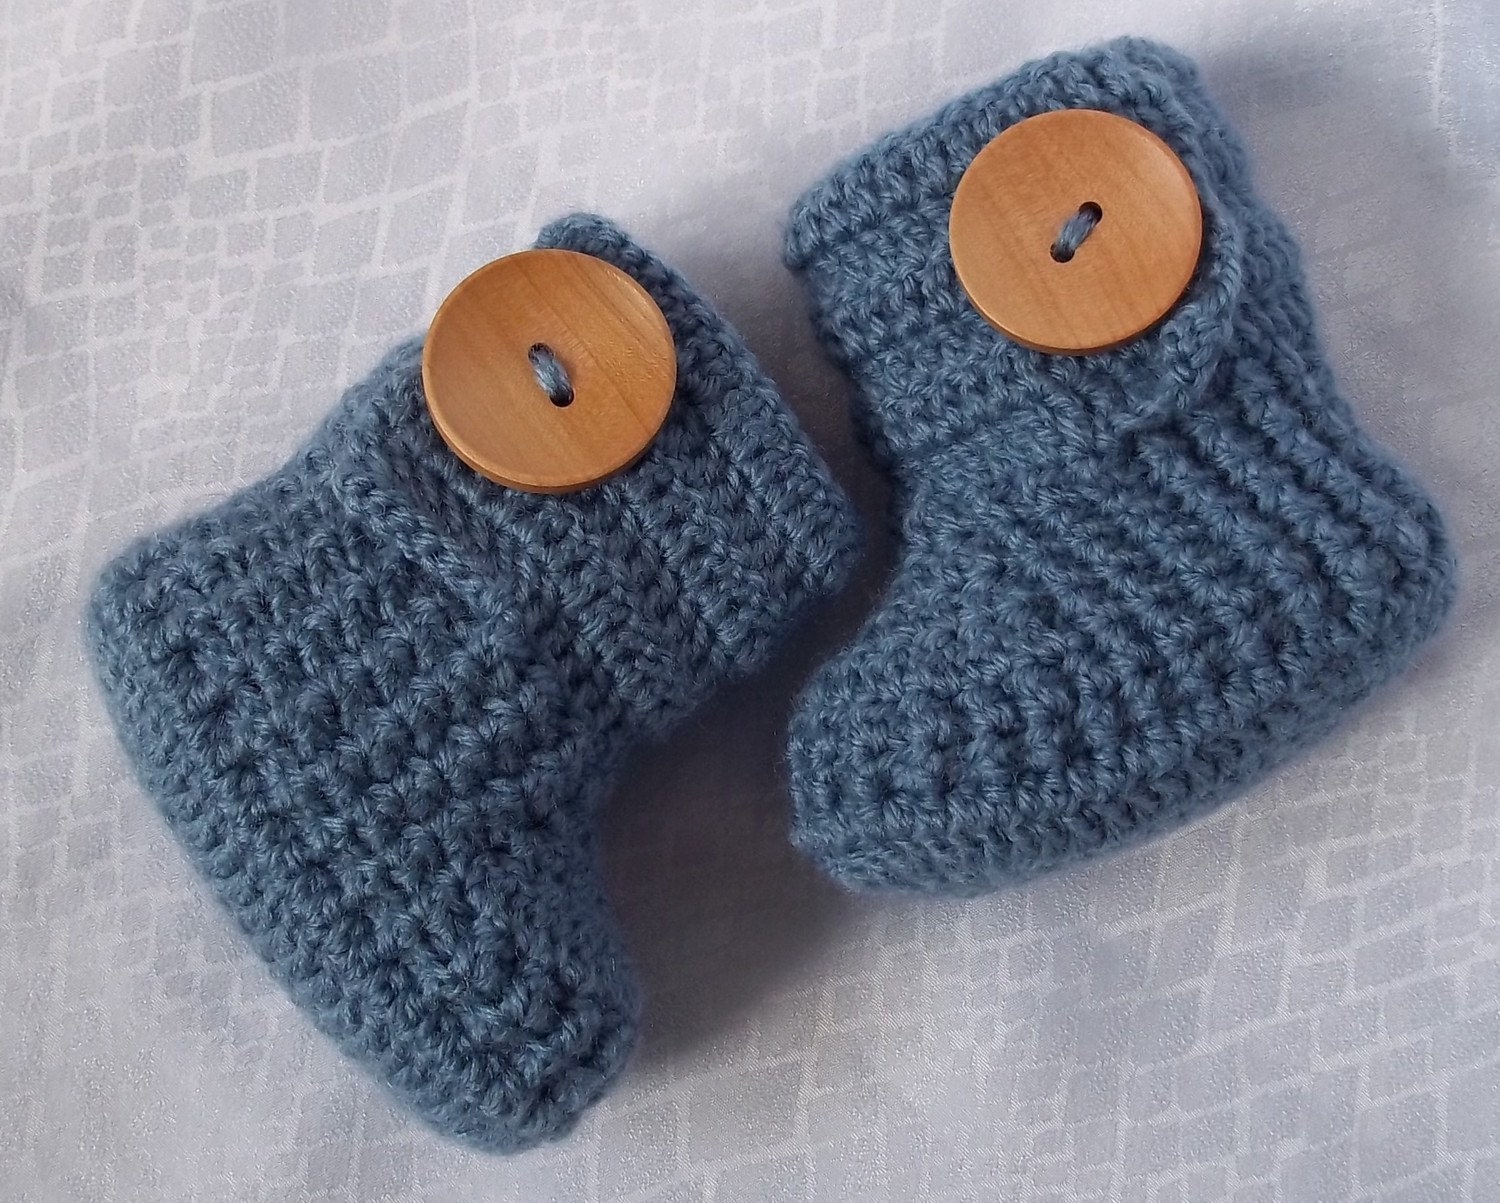 Crochet baby booties for 3 to 6 months with large wooden buttons- ready for shipping